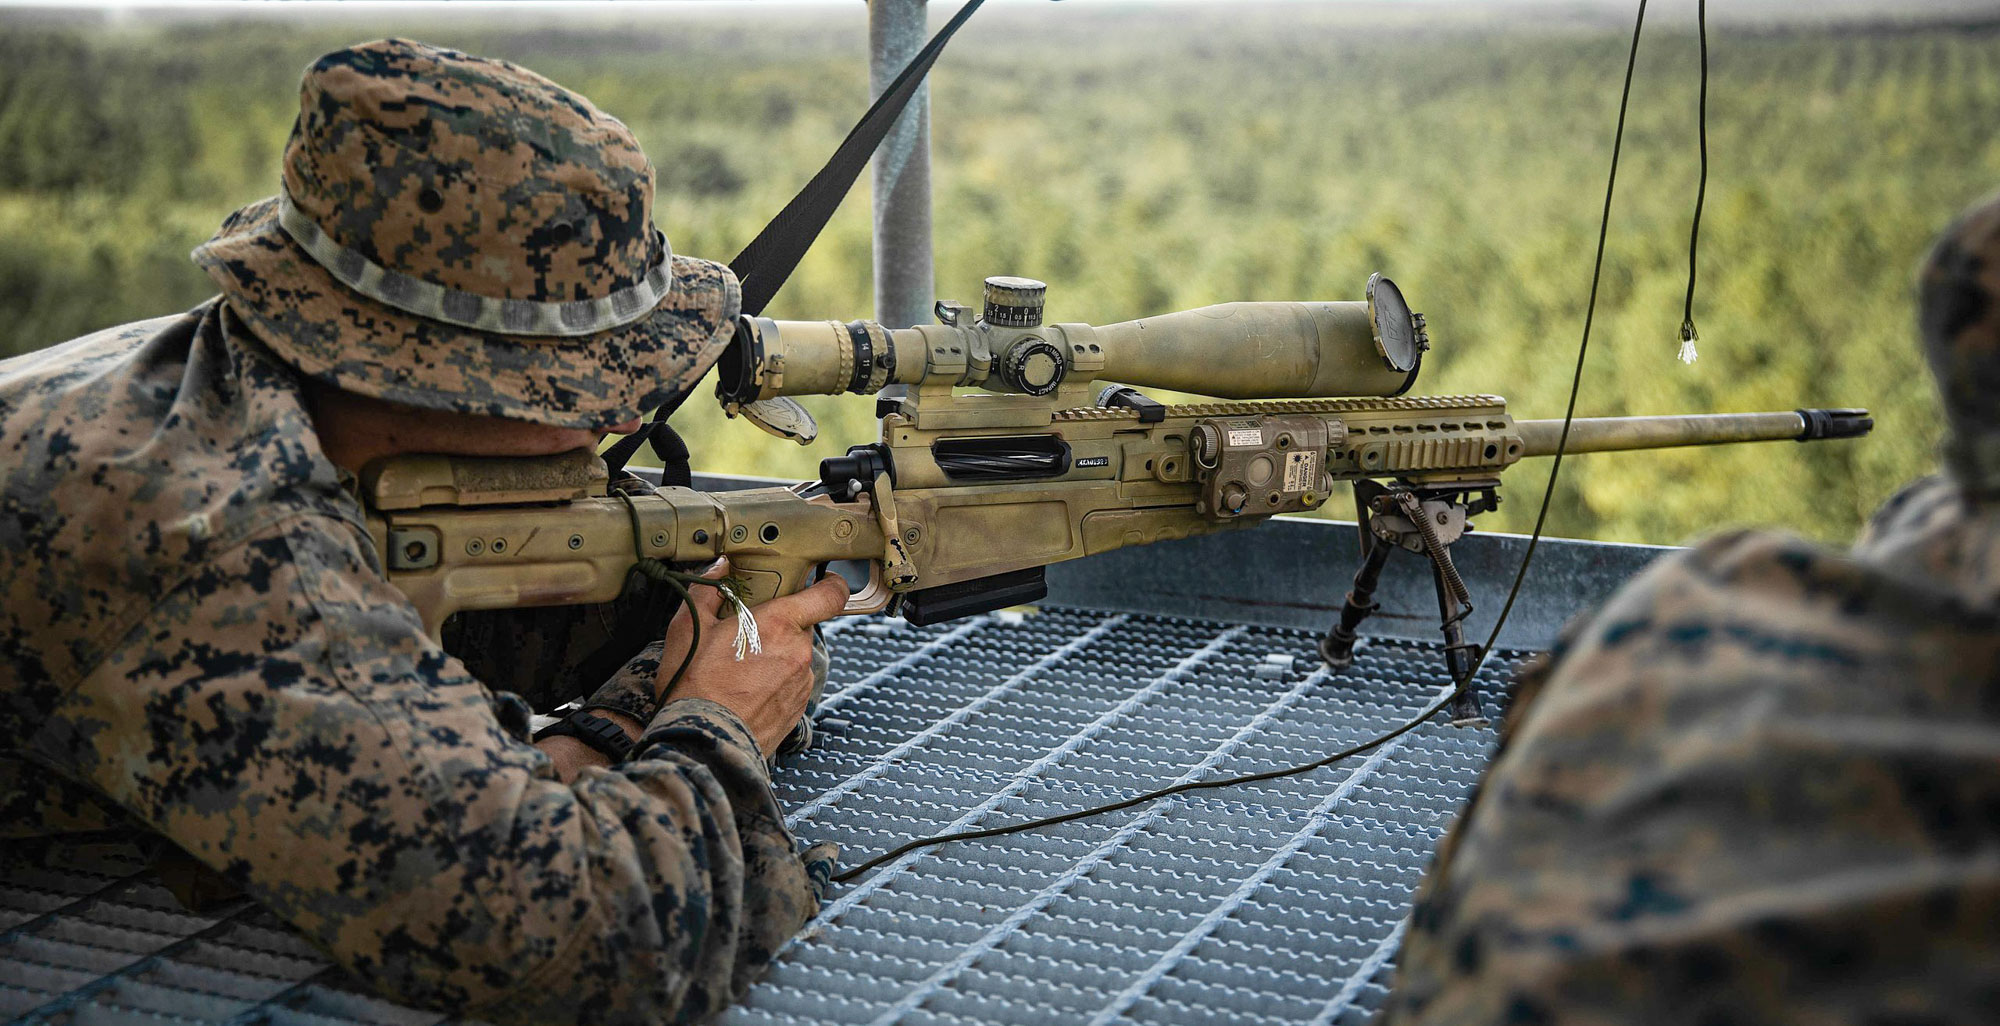 a best sniper rifle for the USMC